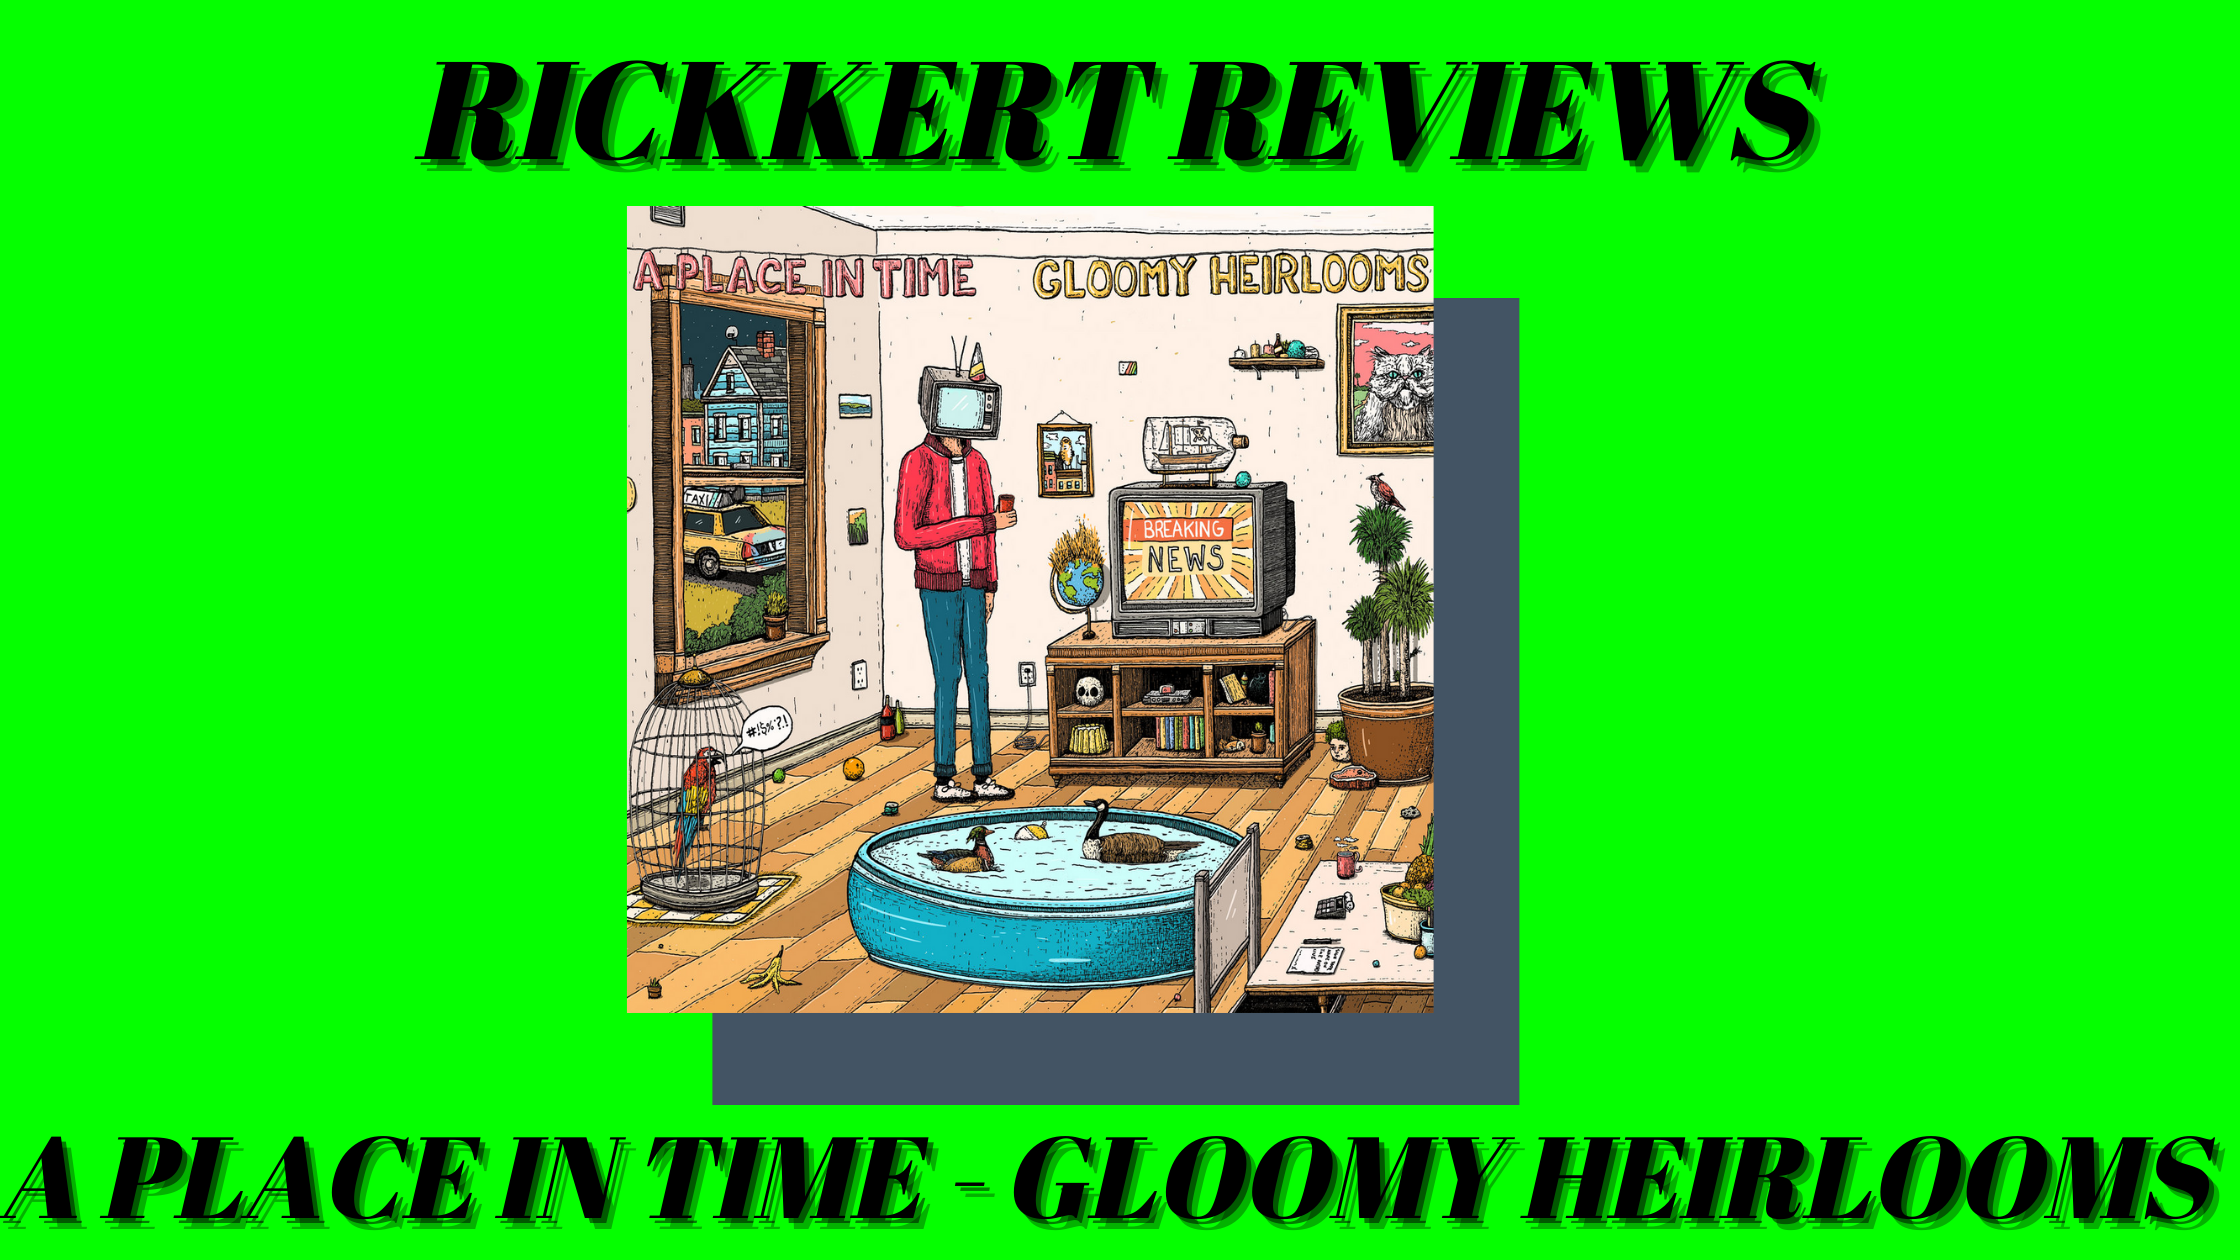 Rickkert Reviews: A Place In Time- Gloomy Heirlooms